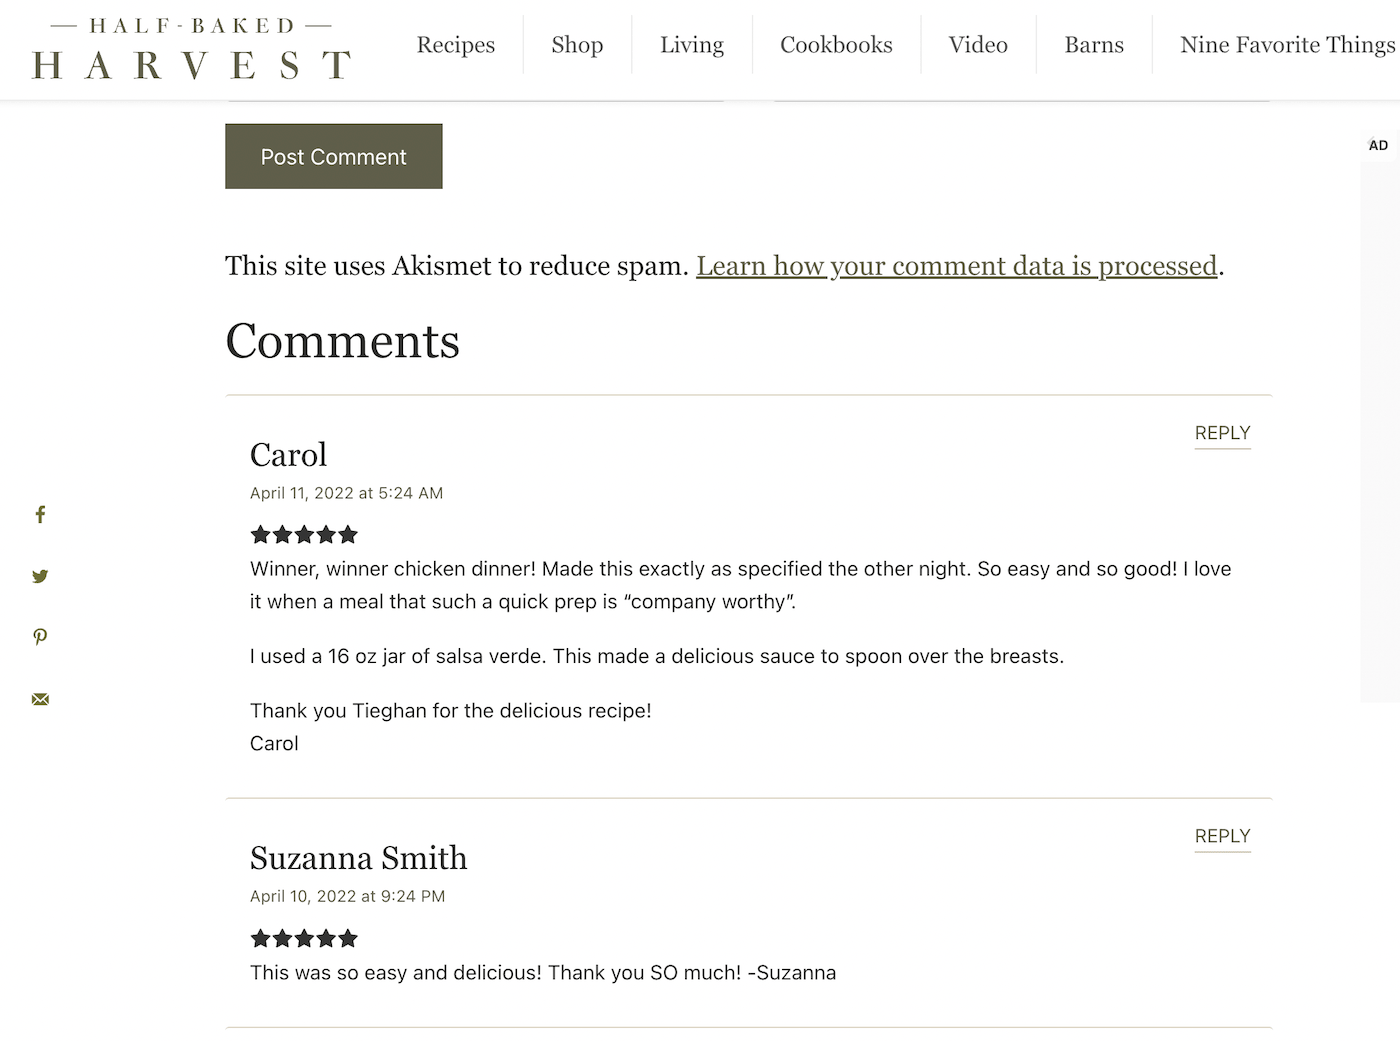 A cooking blog's comments section.